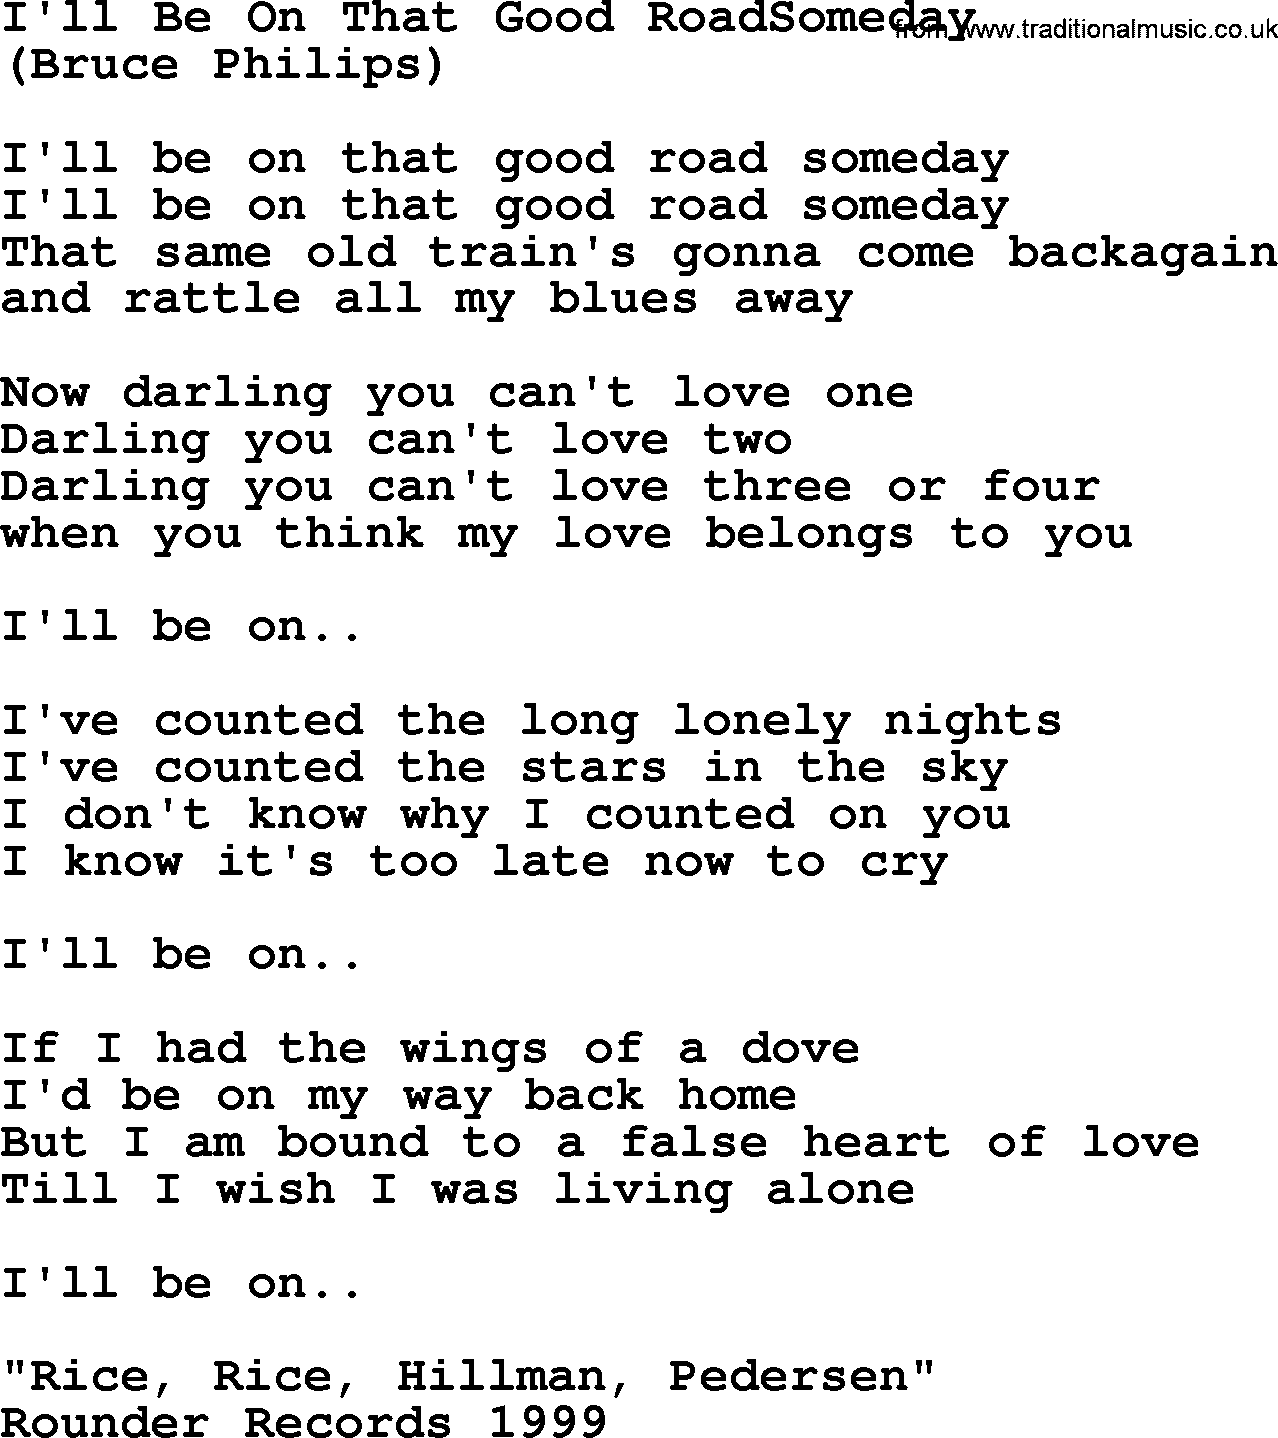 The Byrds song I'll Be On That Good Roadsomeday, lyrics